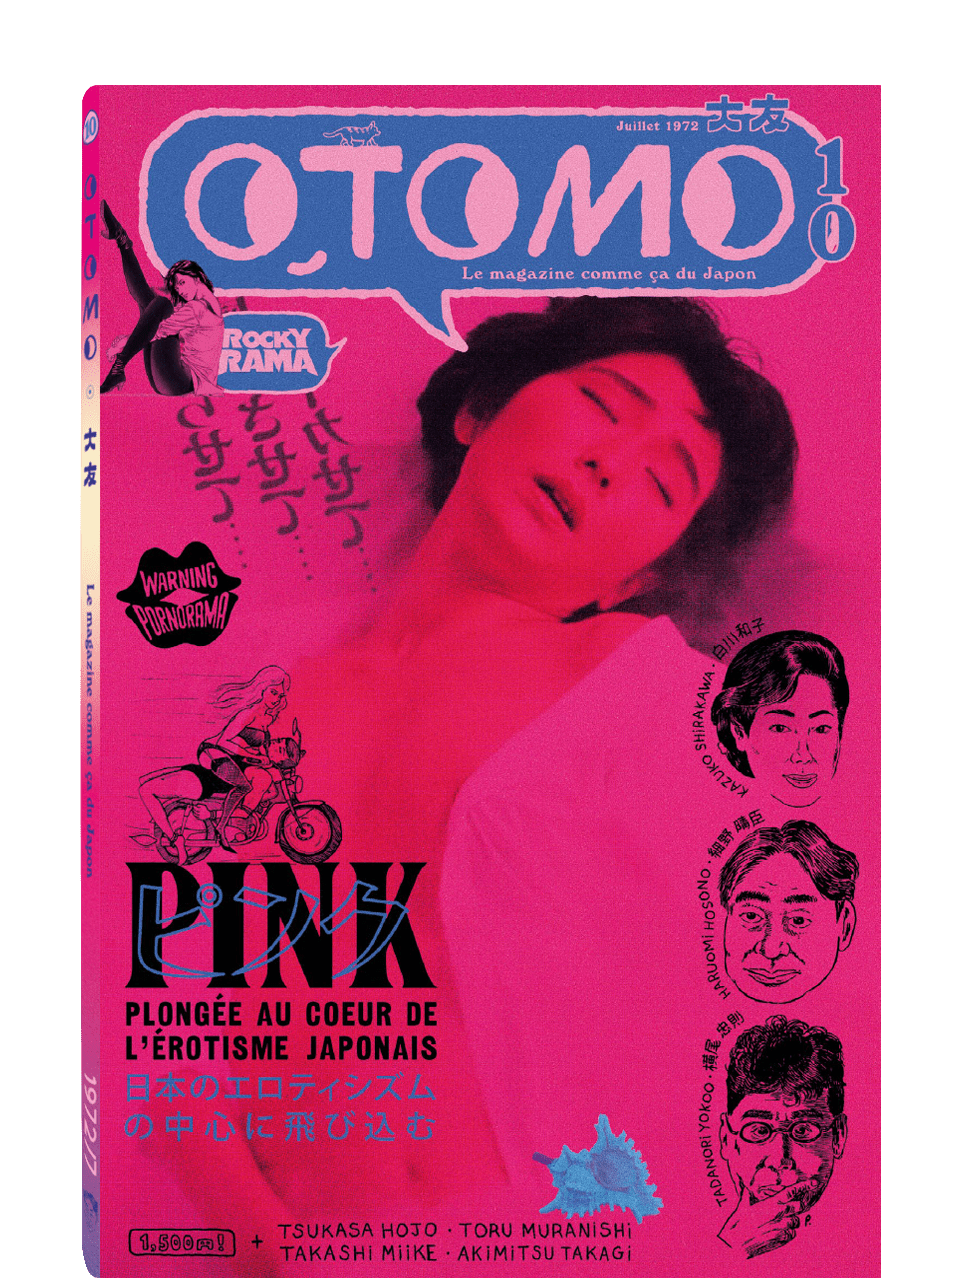 OTOMO 10 - Pink ! - front cover